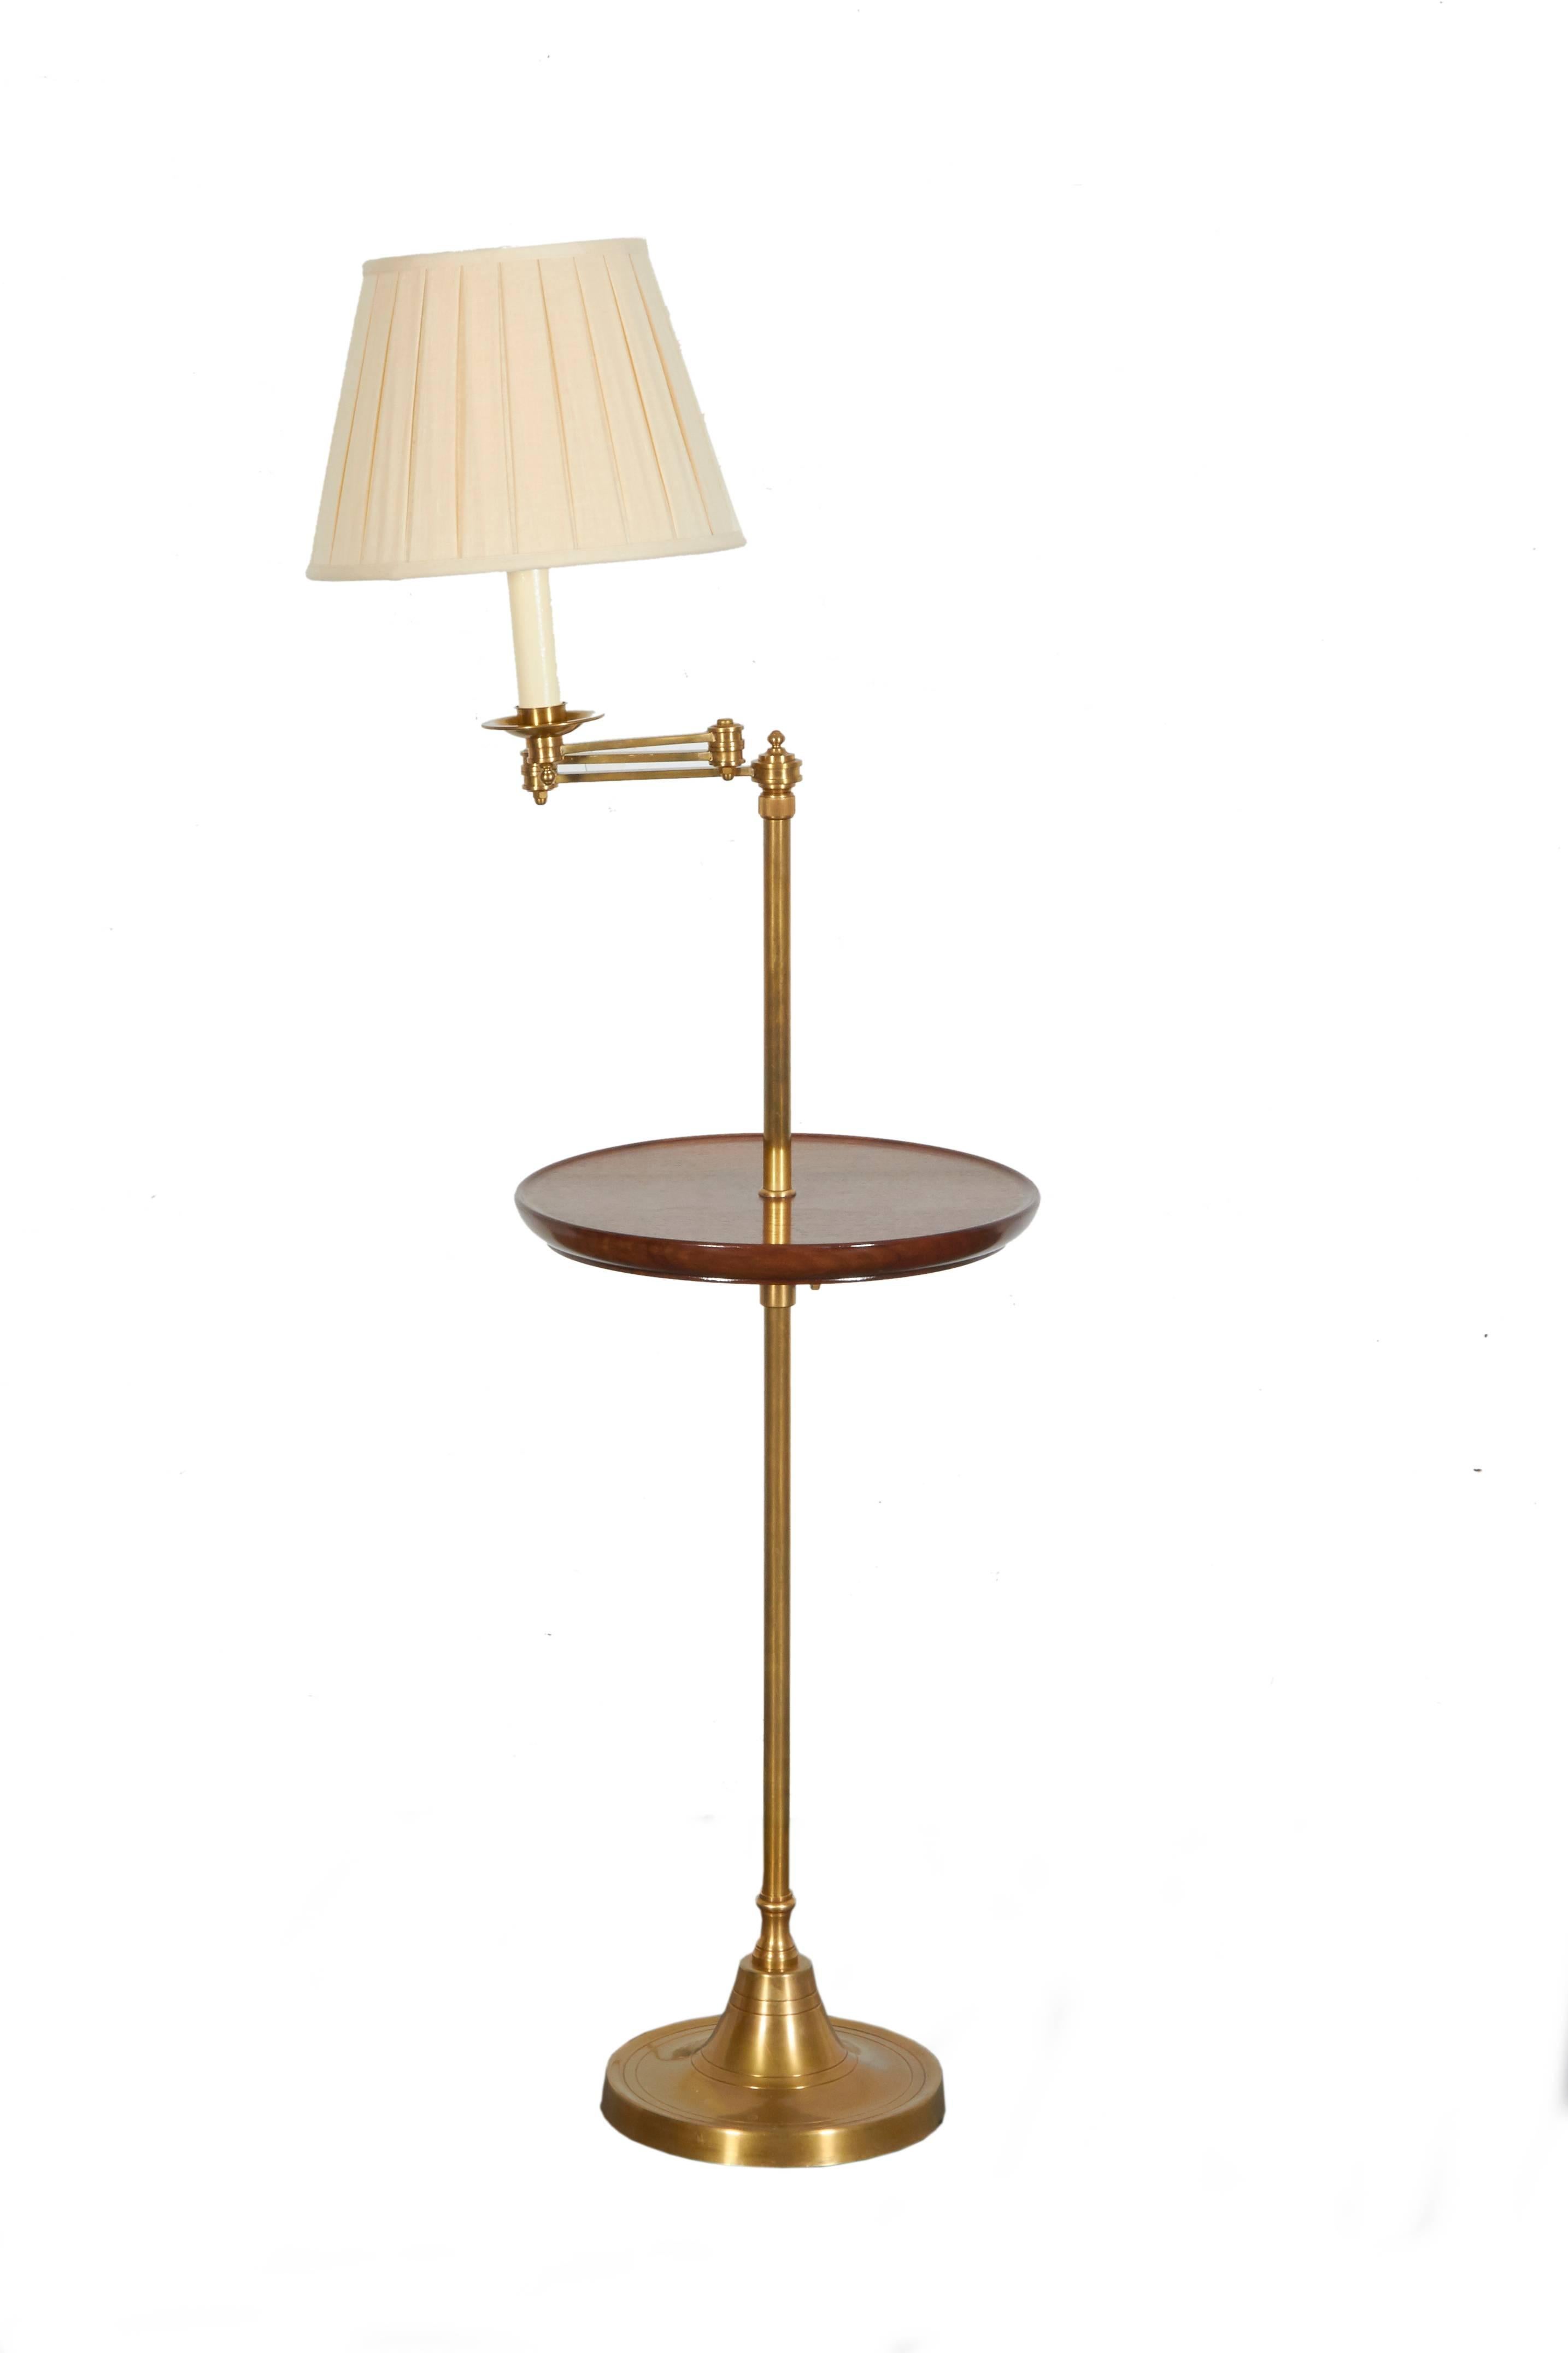 Each with brass adjustable columnar support with round mahogany tabletop that also can be adjusted to the desired height. With custom box-pleated lampshade by Abat Jour. Can adjust from 50